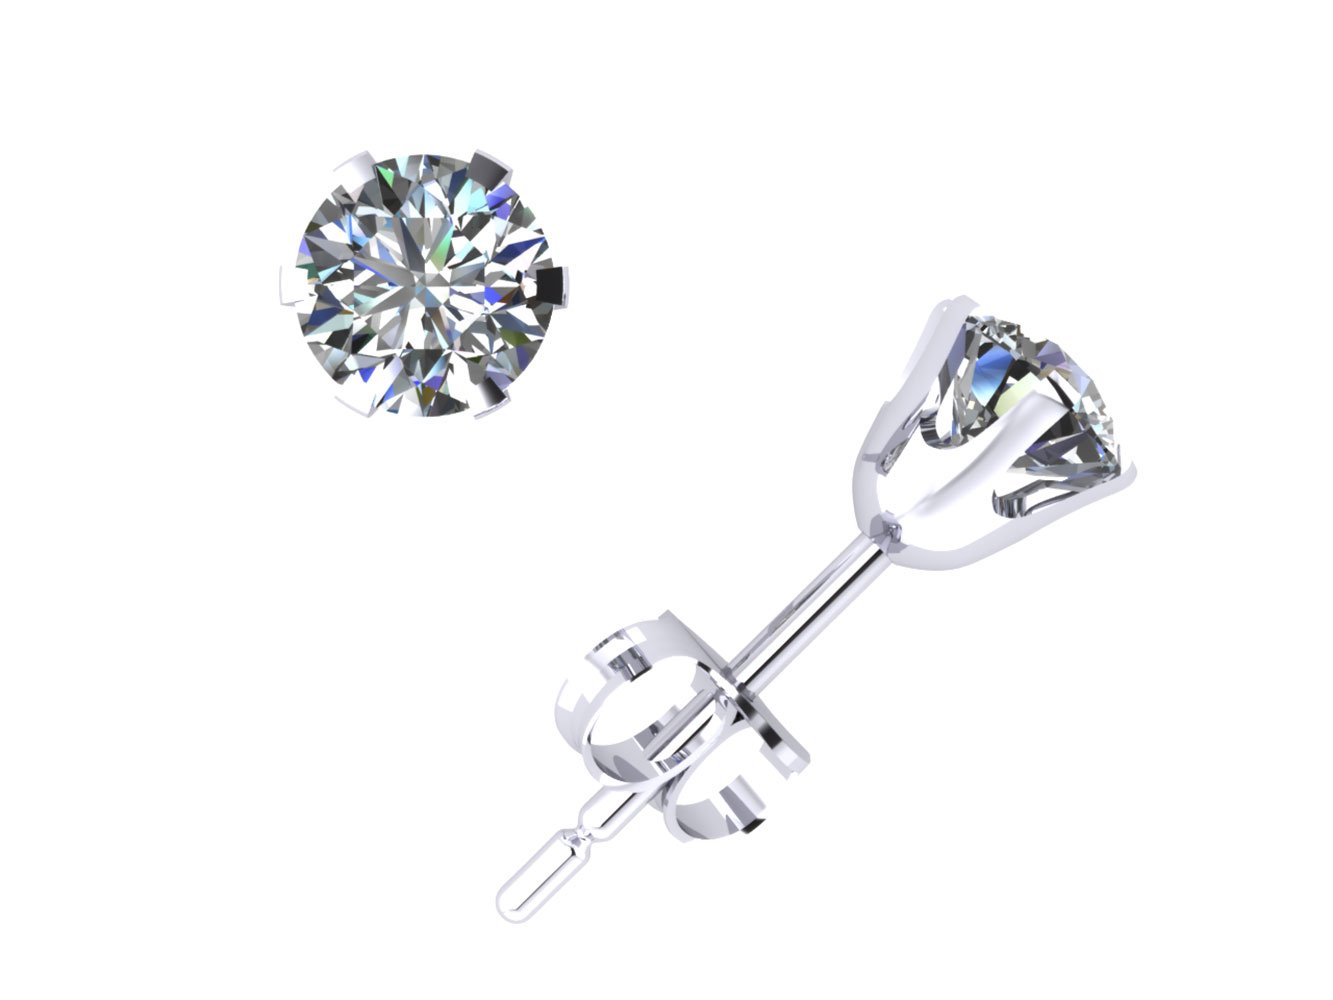 Jewel We Sell Genuine 0.40Ct Round Diamond Stud Earrings 18k White or Yellow Gold Prong Push Back H SI2